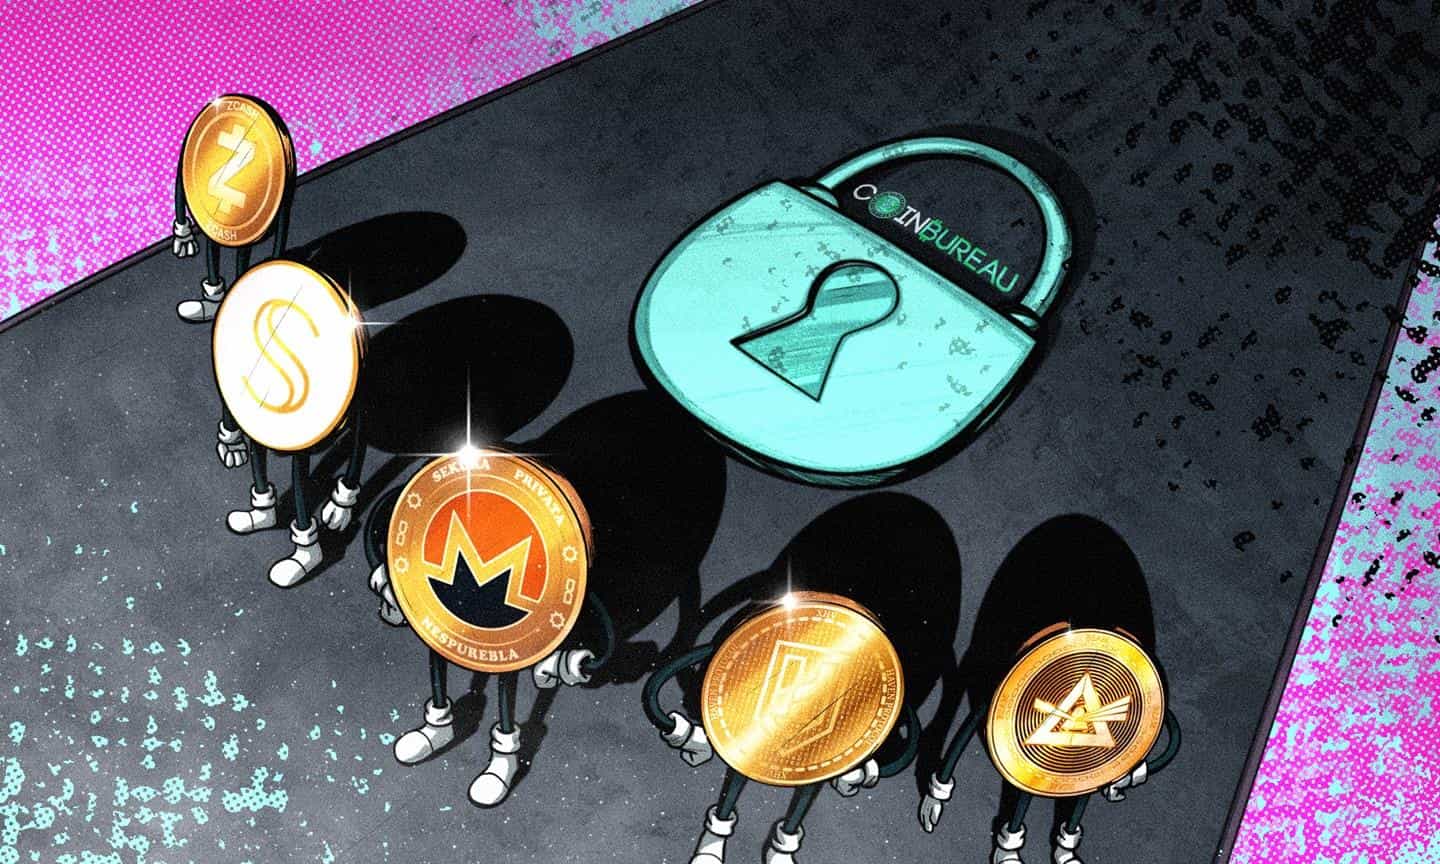 The Top 5 Privacy Coins for 2022